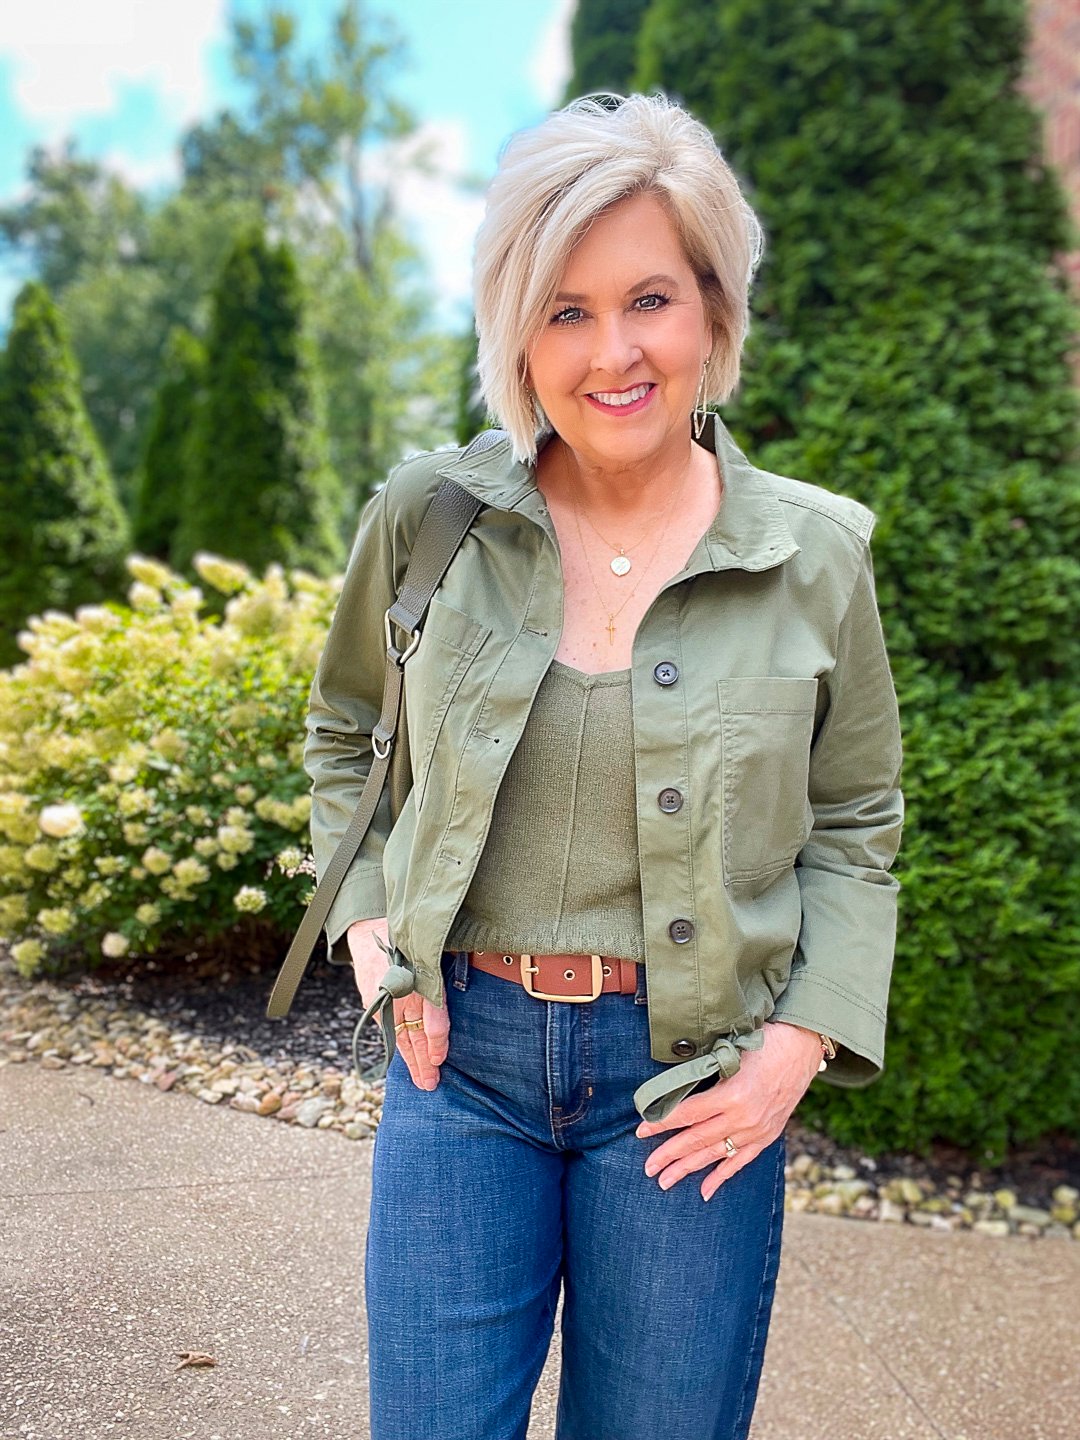 Over 40 Fashion Blogger, Tania Stephens is wearing an olive green jacket and sweater tank from Banana Republic1